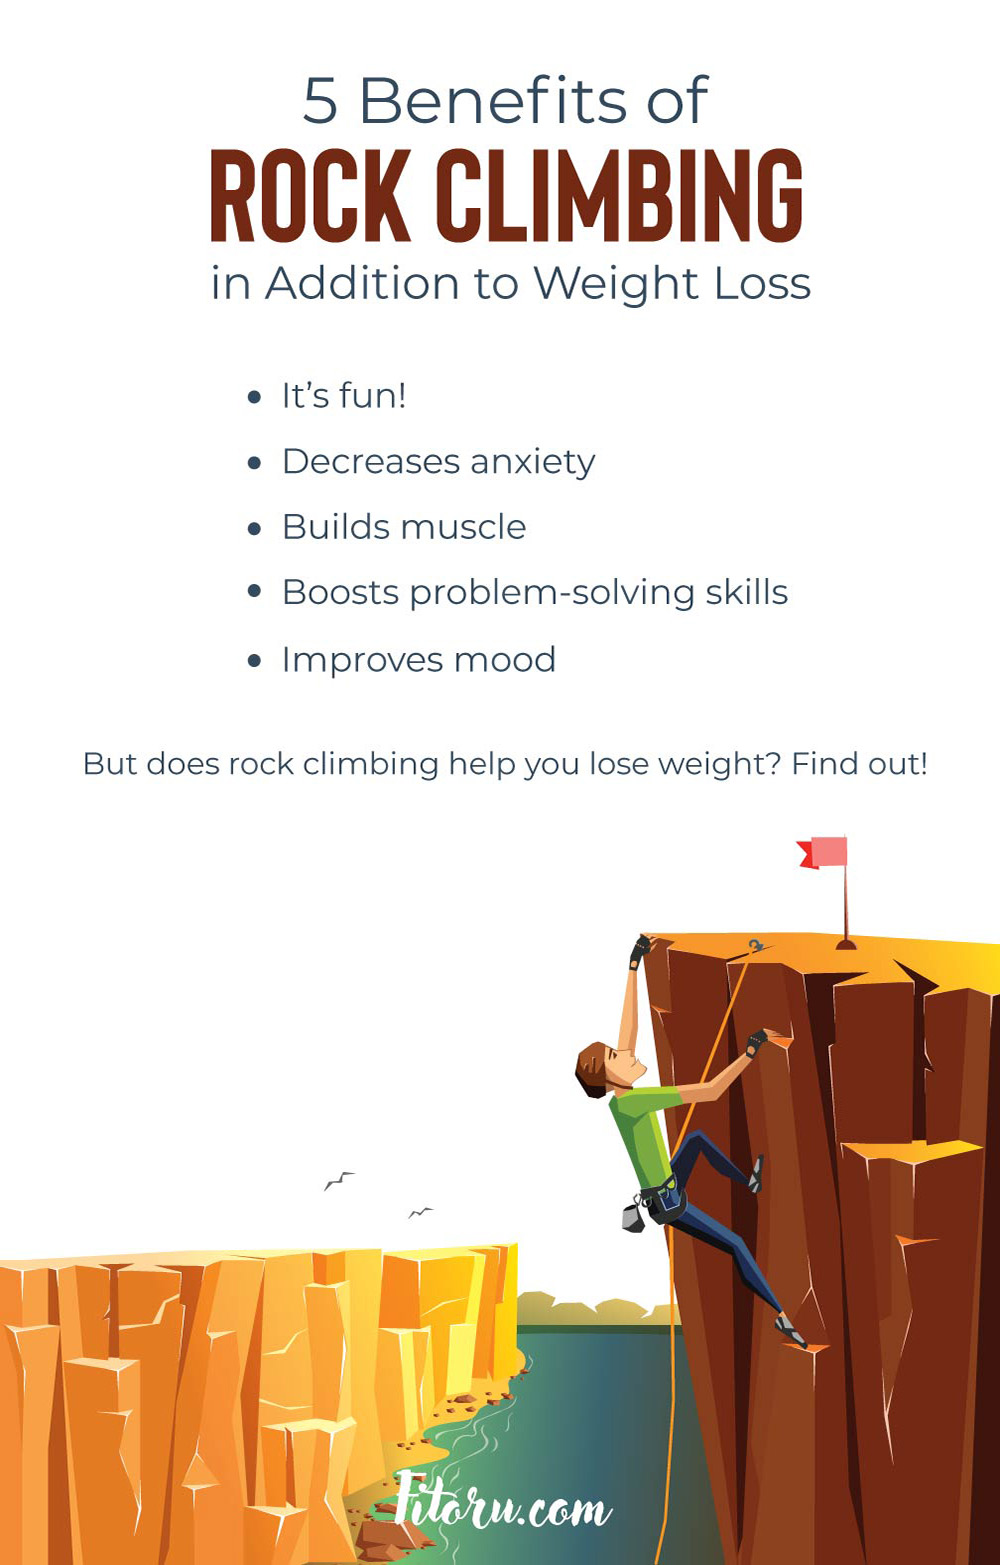 Does rock climbing help you lose weight?